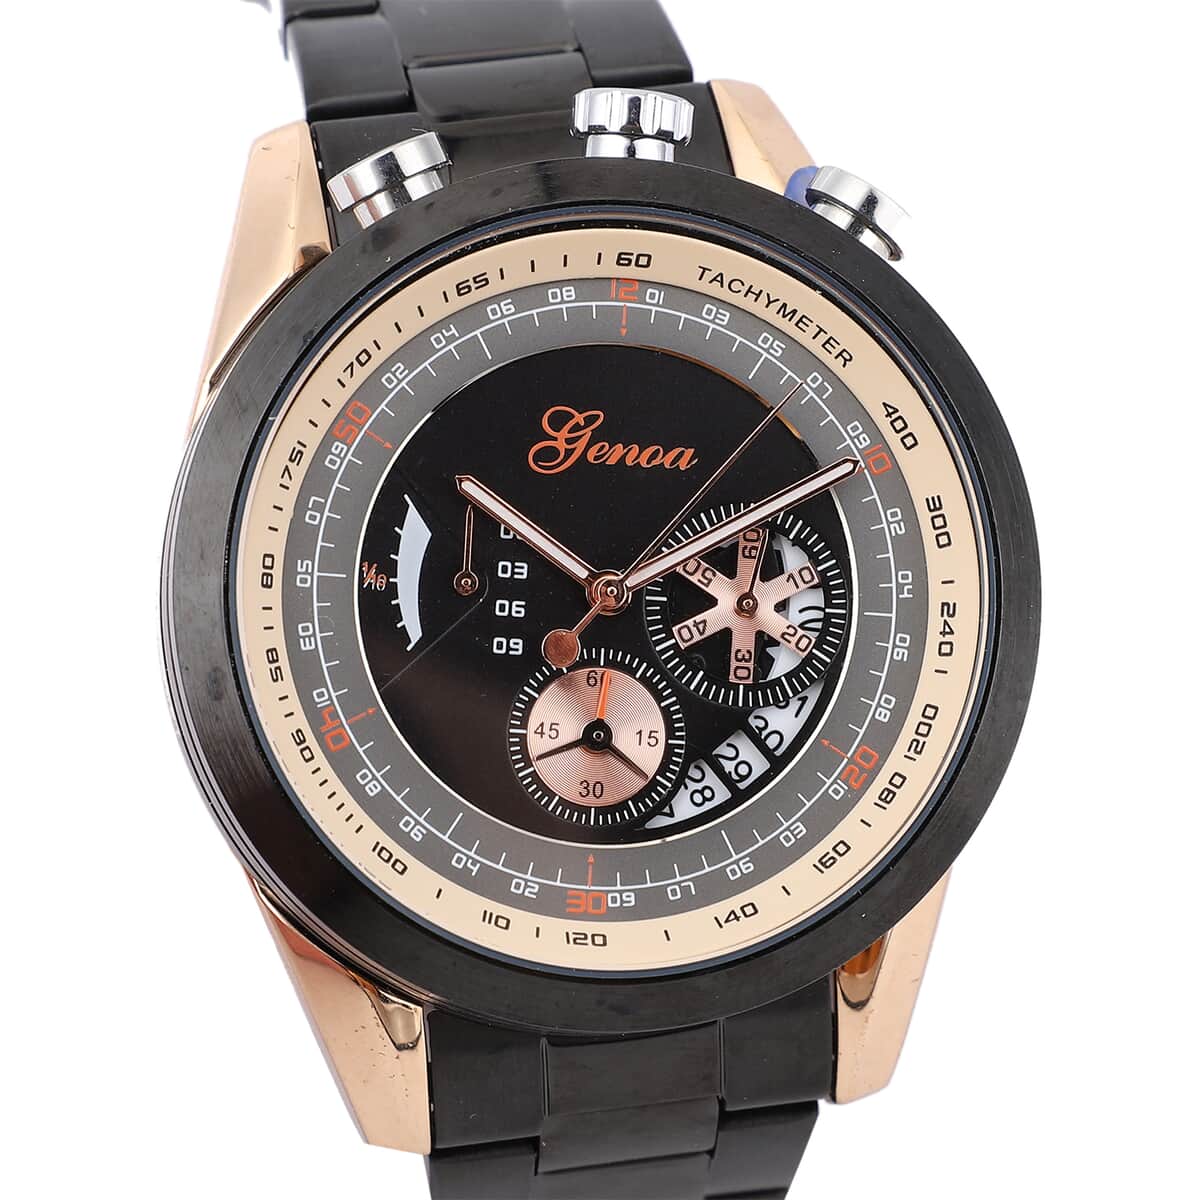 Genoa Multi-function Quartz Movement Watch in ION Plated Black & Stainless Steel (46mm) image number 3